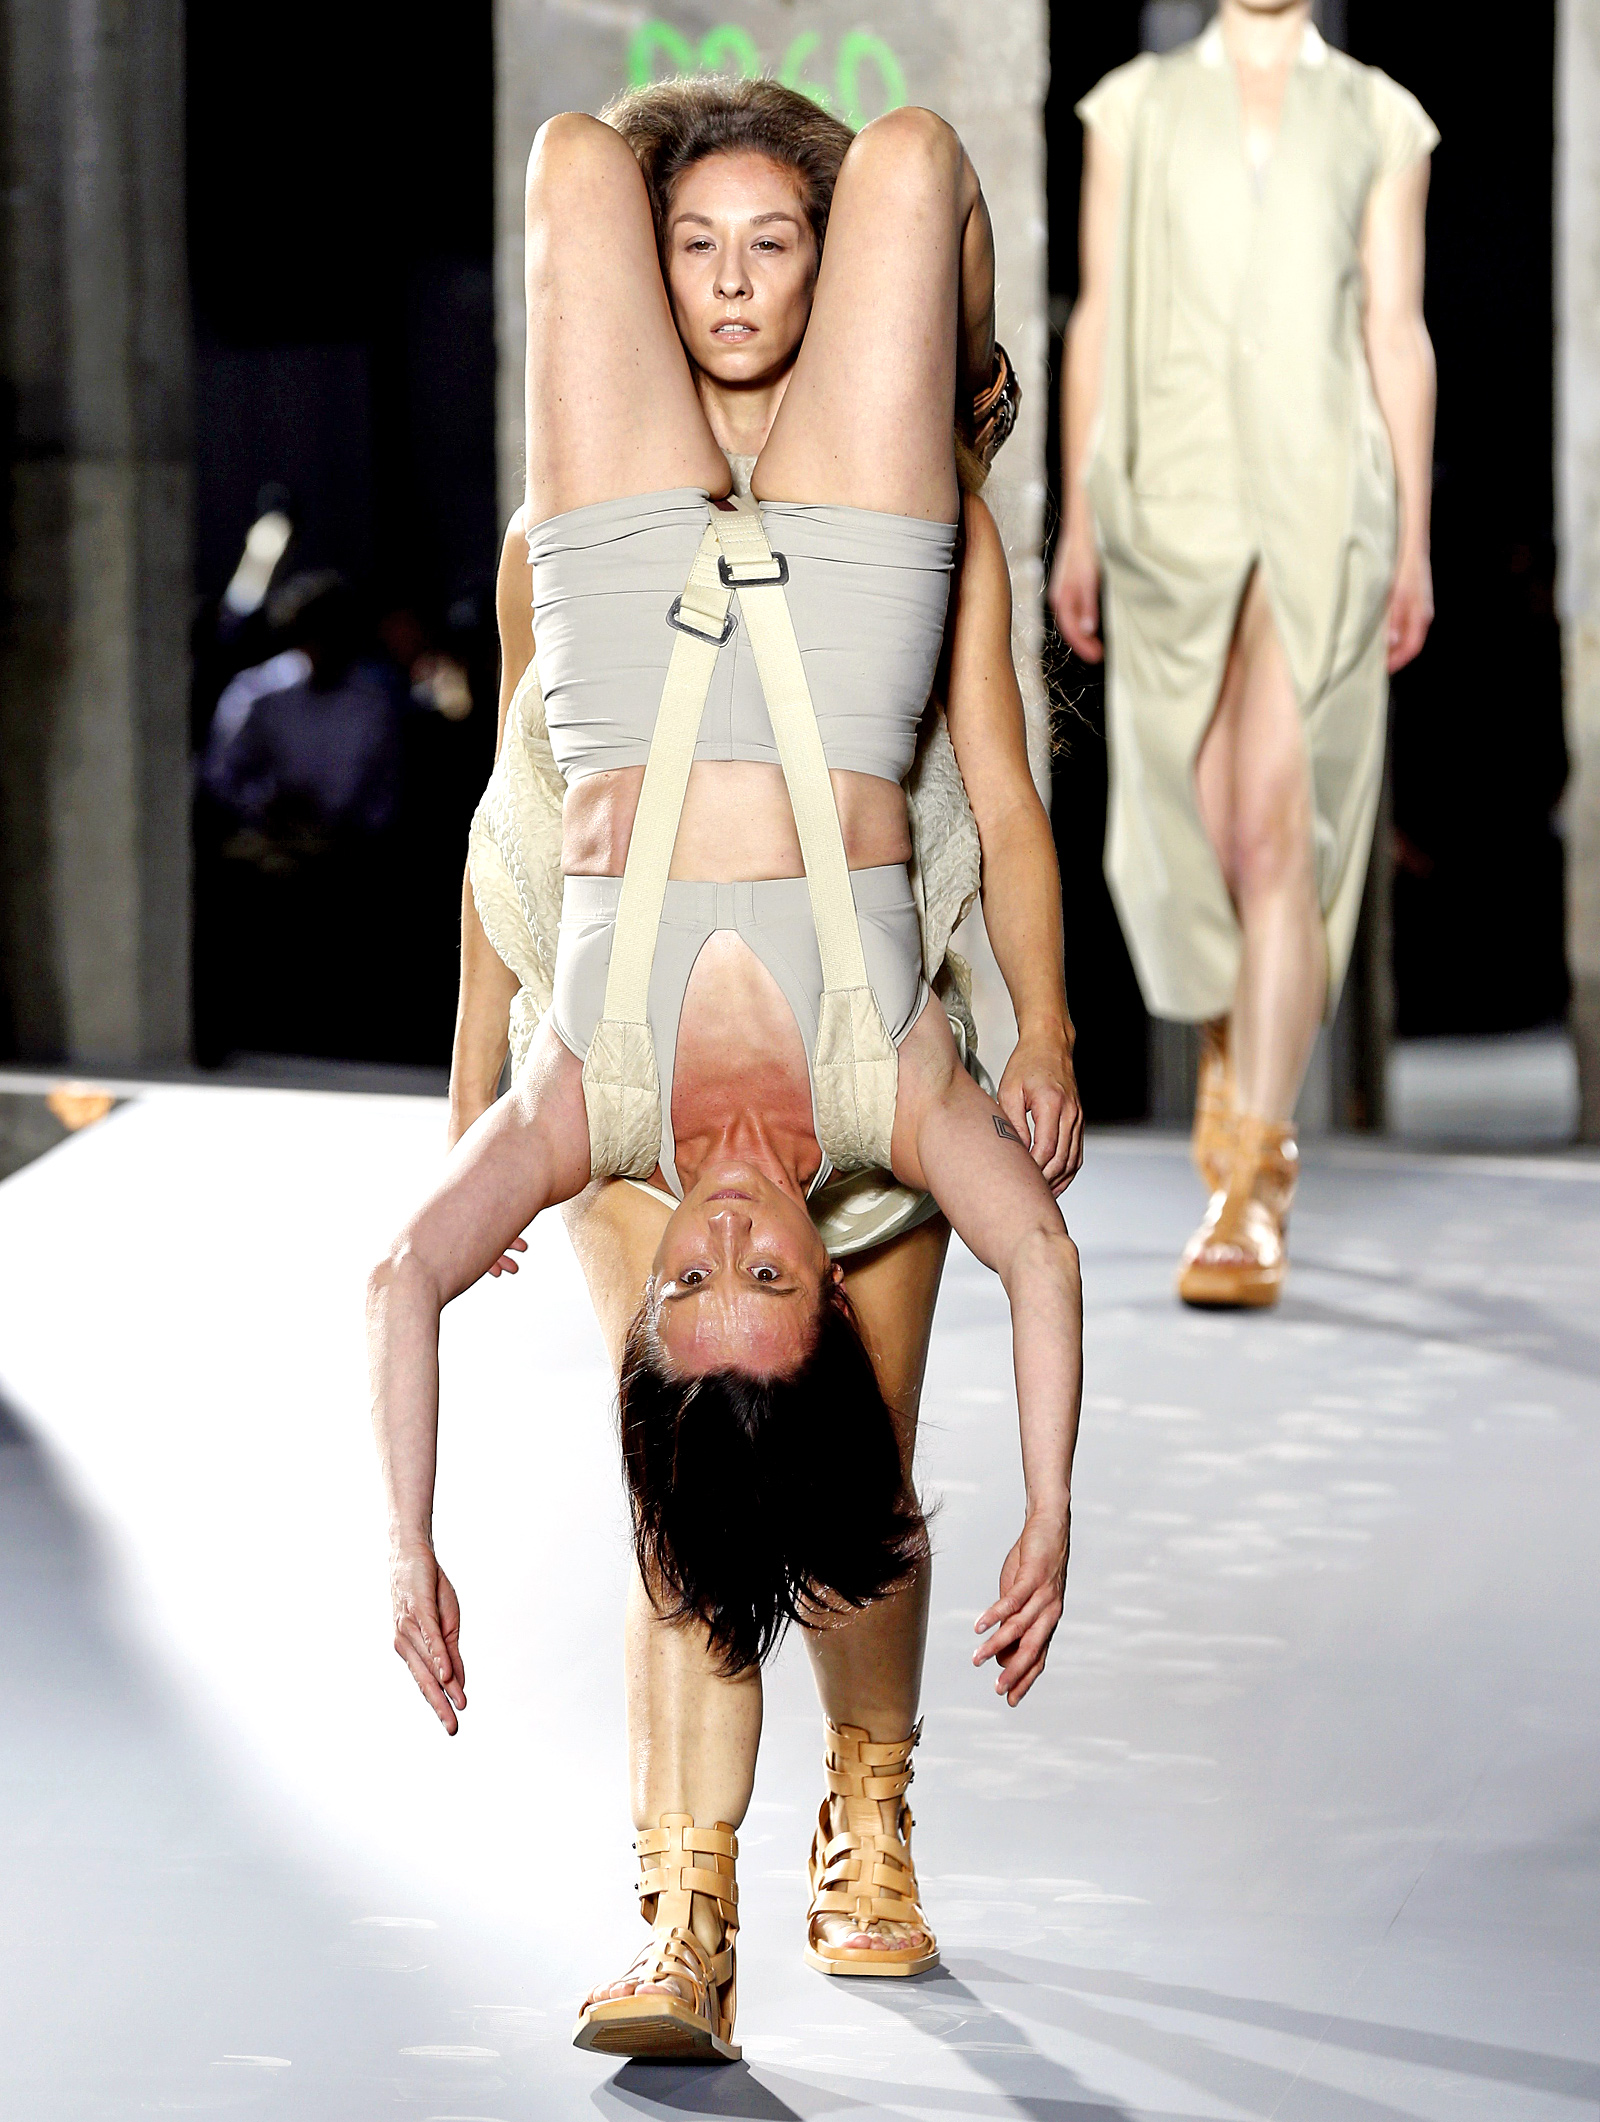 What Is Happening in Rick Owens Spring 2016 Insane Runway Show?